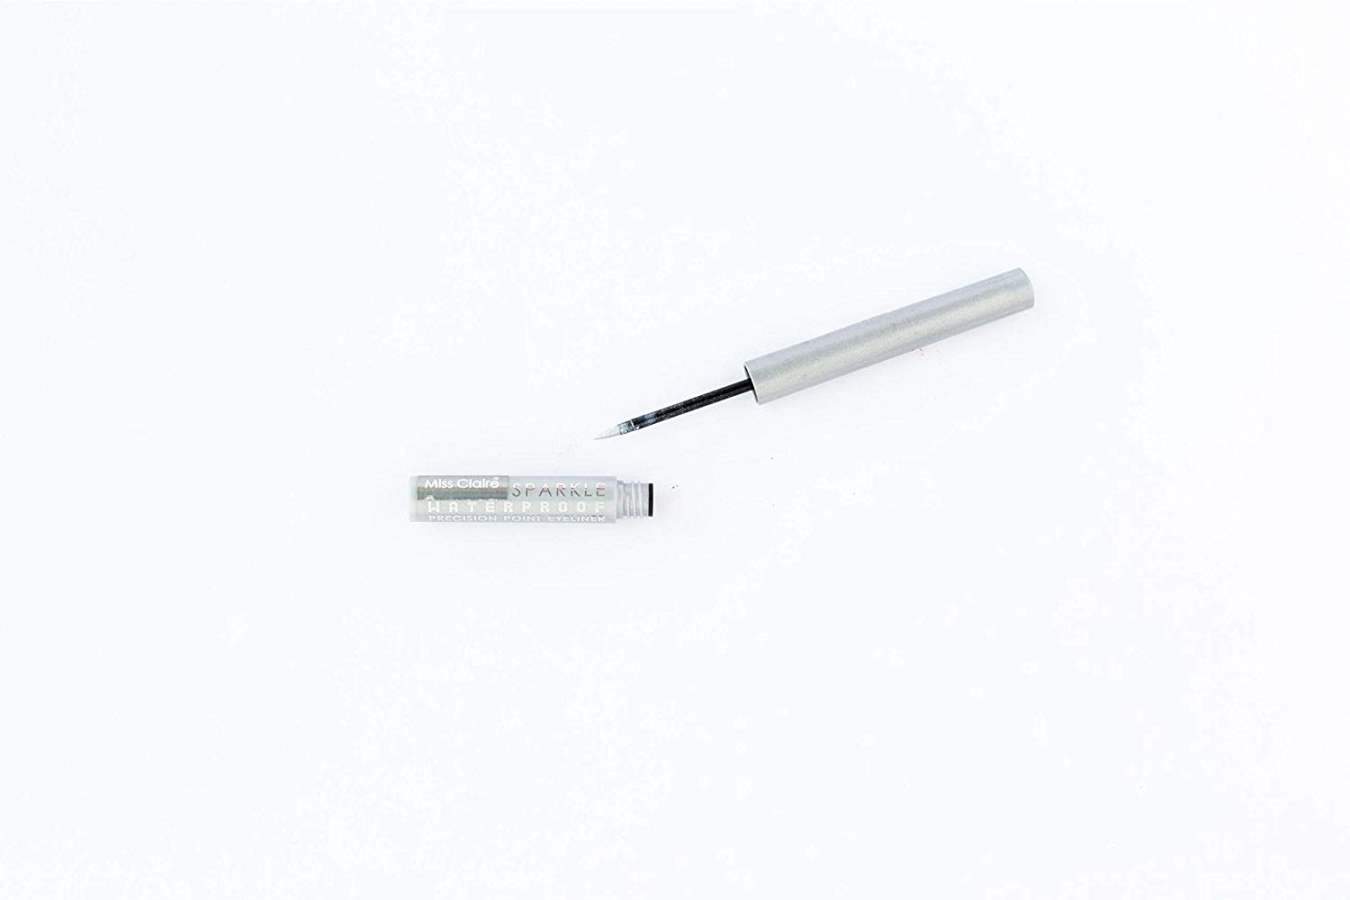 Miss Claire Parkle Waterproof Precision Point Eyeliner, Silver - 1 no